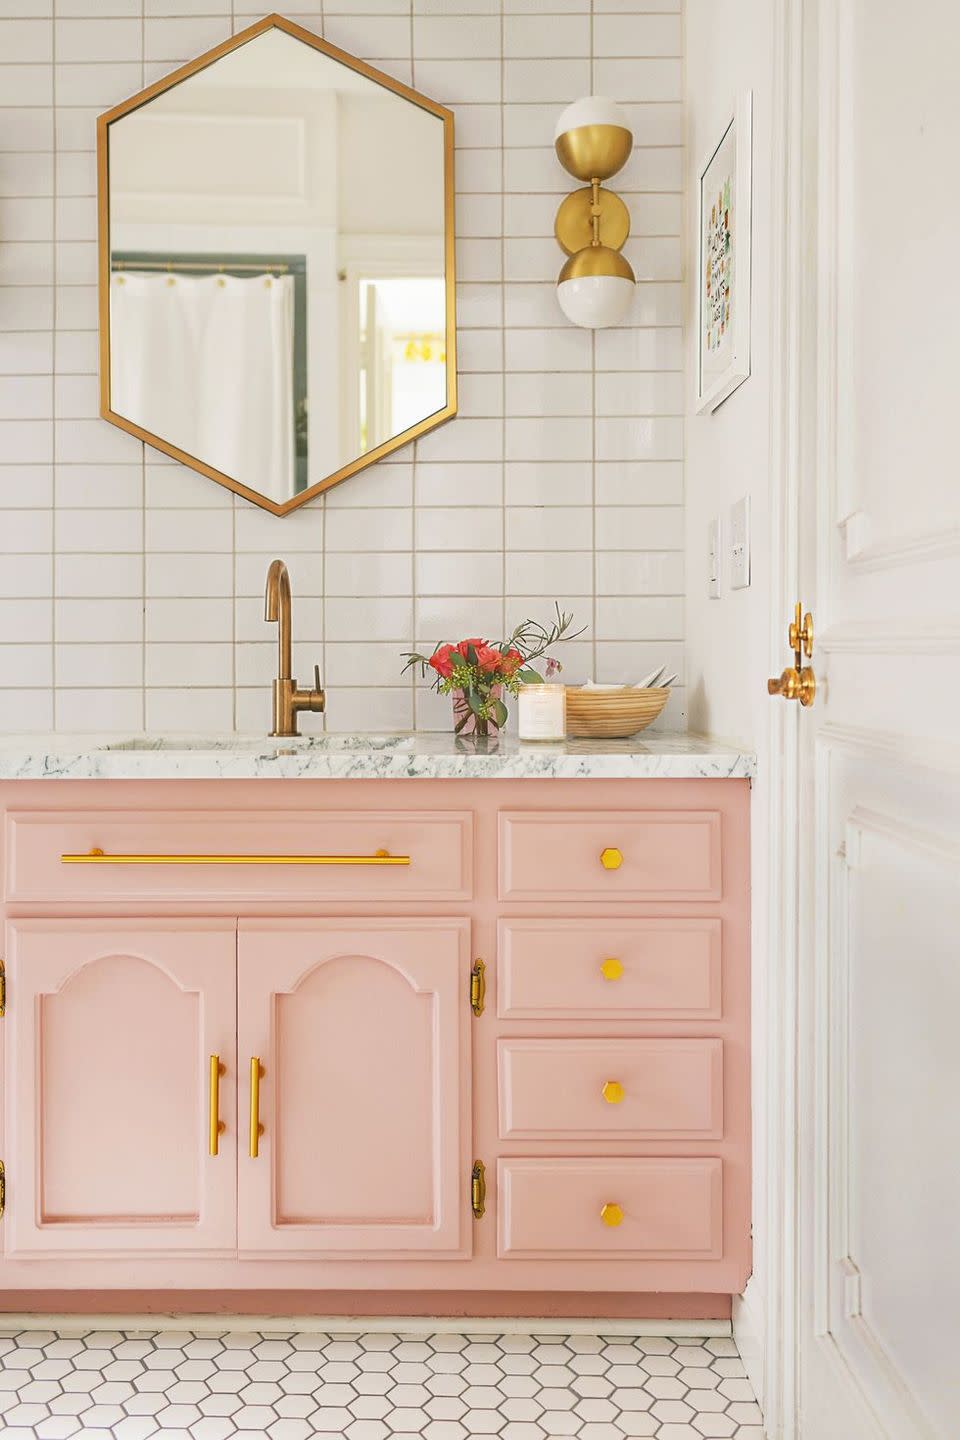 <p>Gold, white and soft pink make an elegant combination. This bathroom's white tiles and gold fixtures pair well with the pink dresser and window's light. </p>